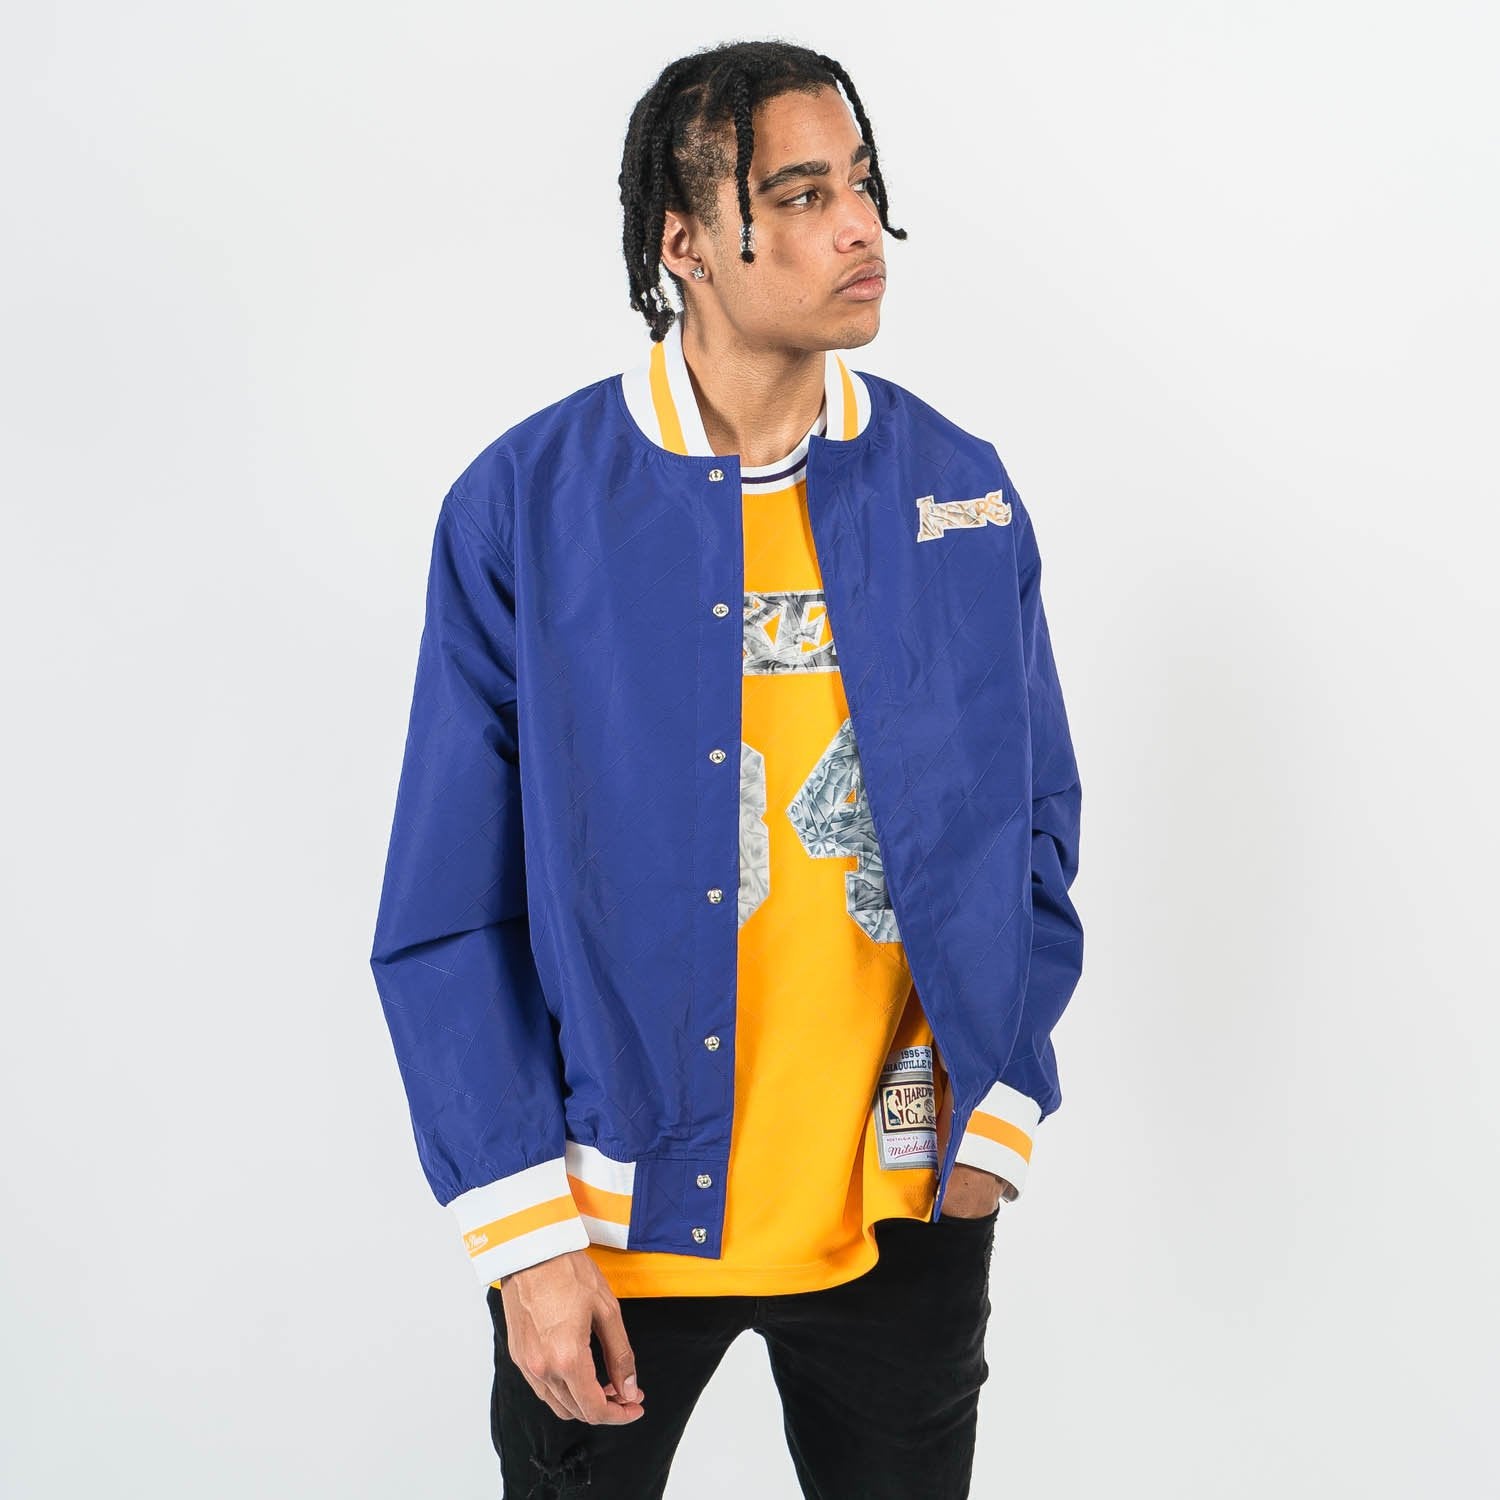 Los Angeles Lakers Mitchell & Ness 75th Anniversary Warm Up Jacket - Mens